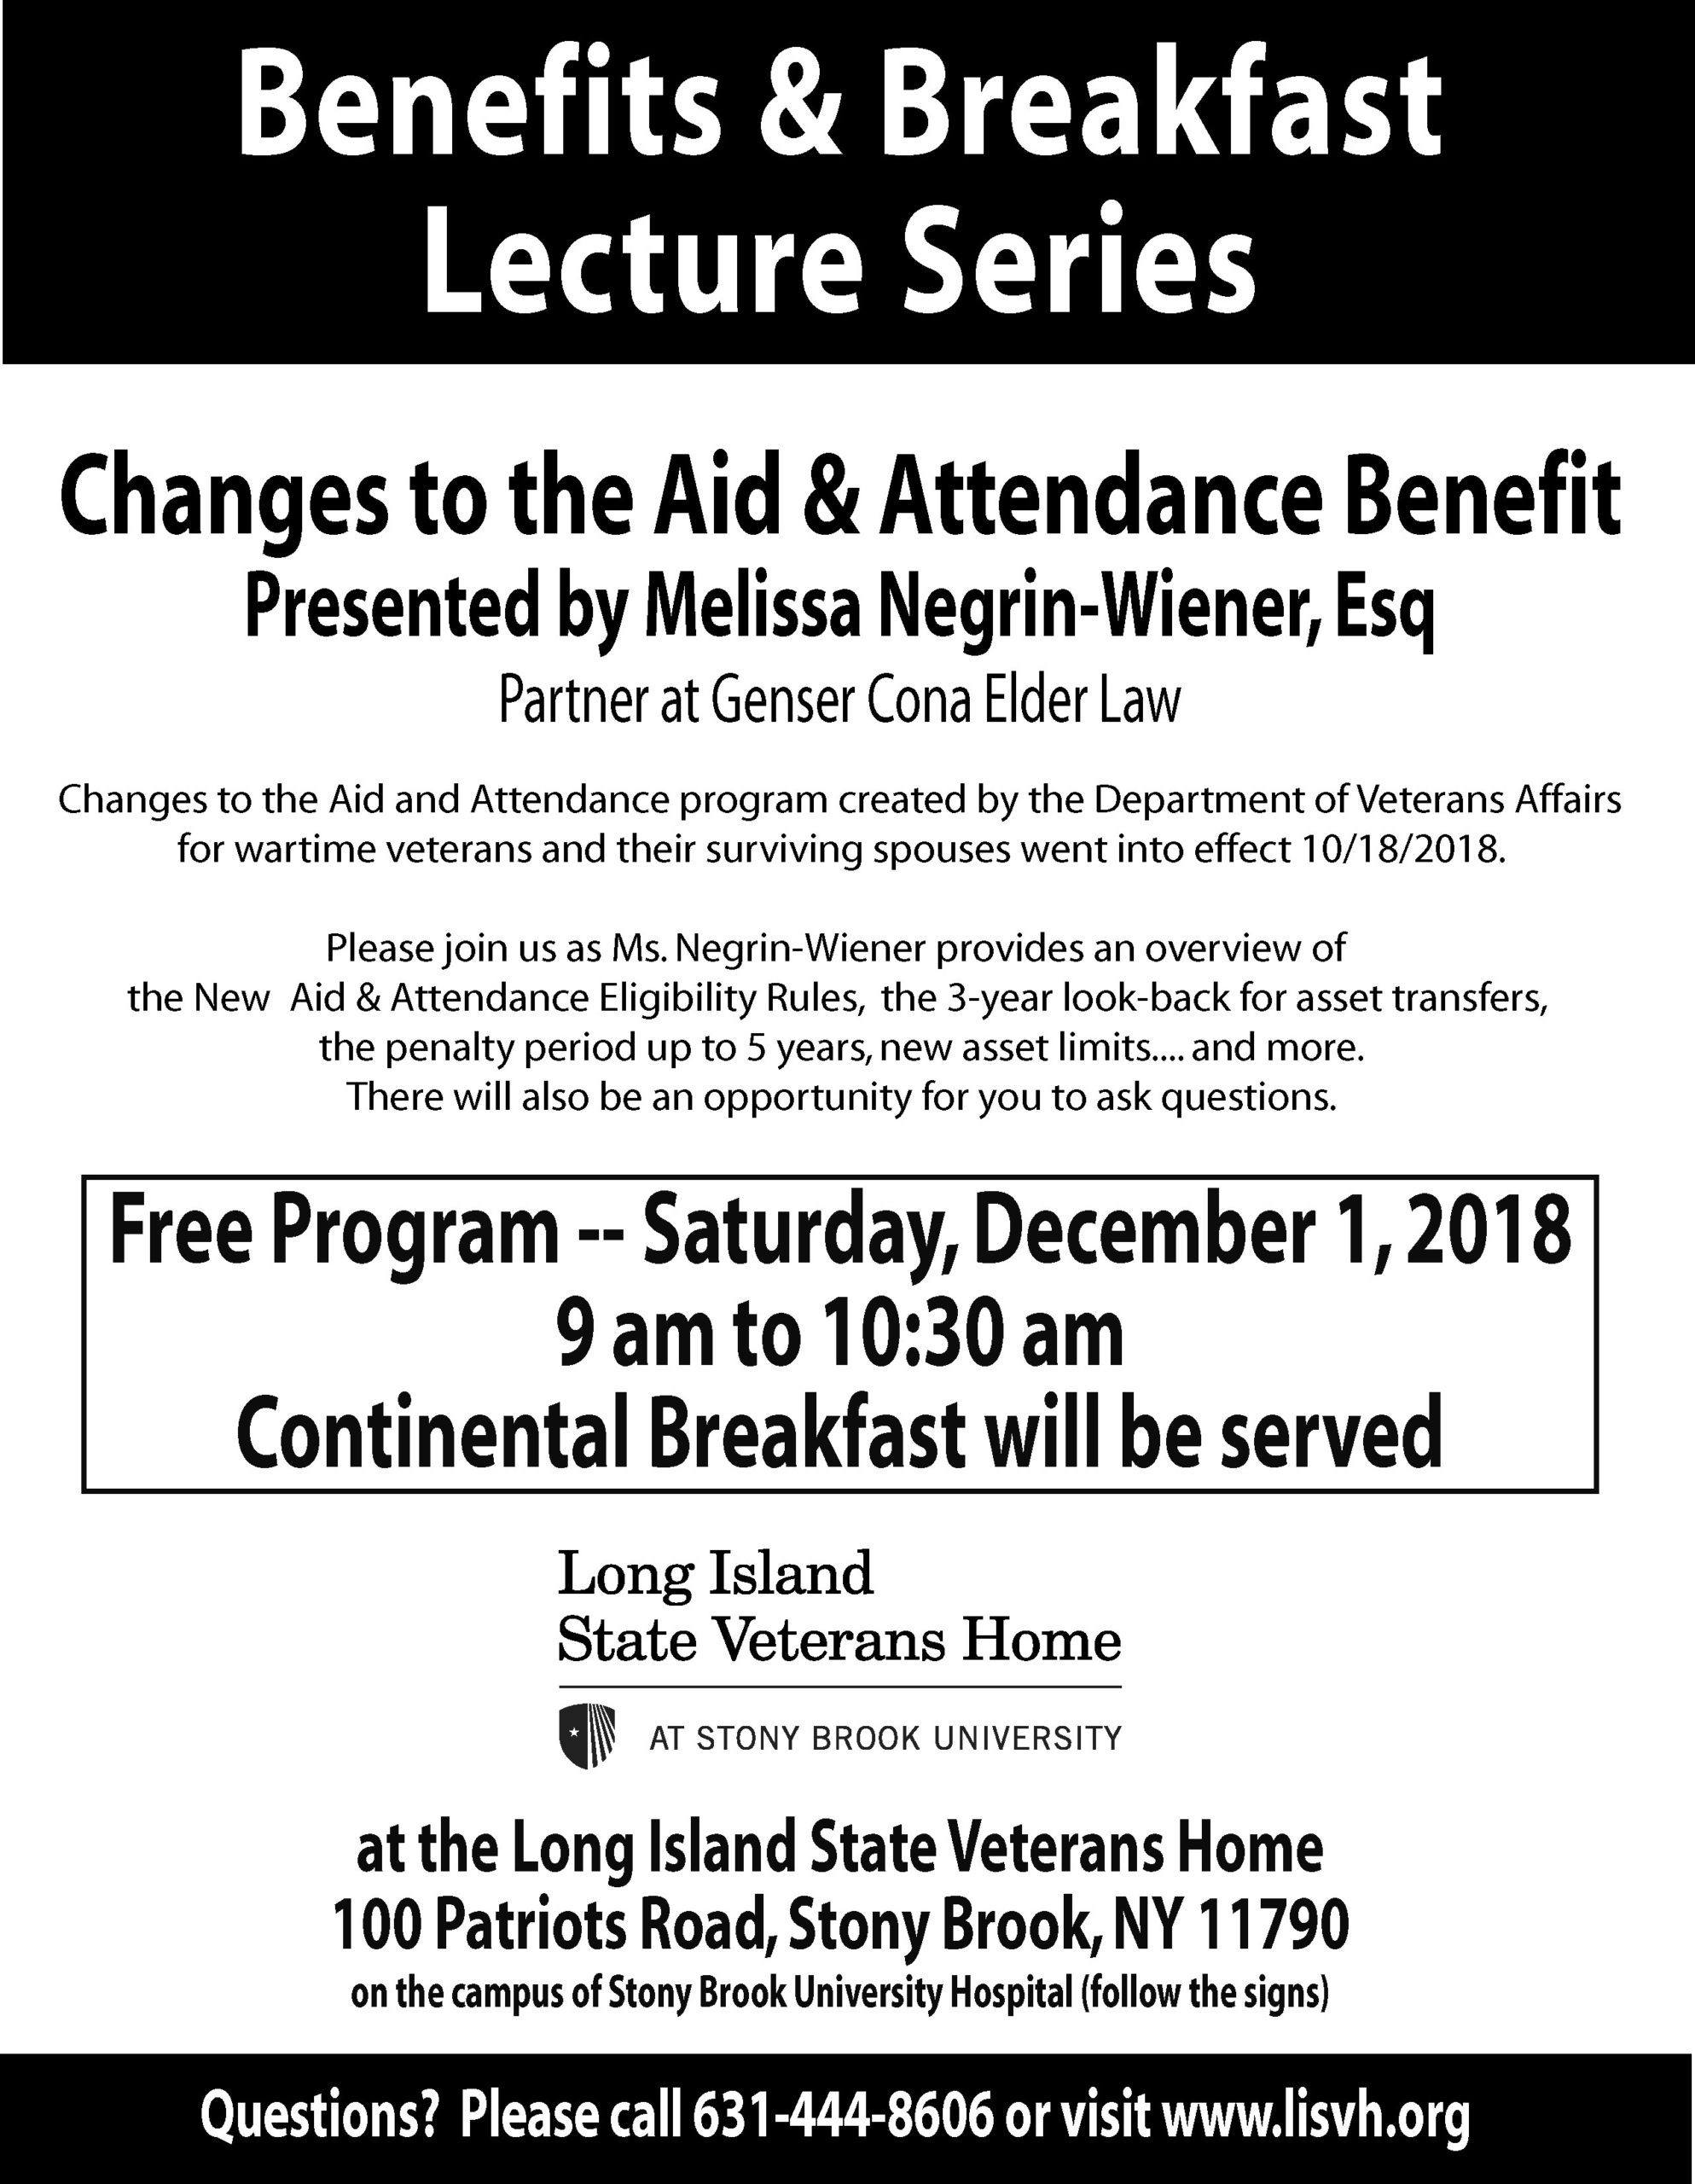 Benefits and Breakfast Lecture series